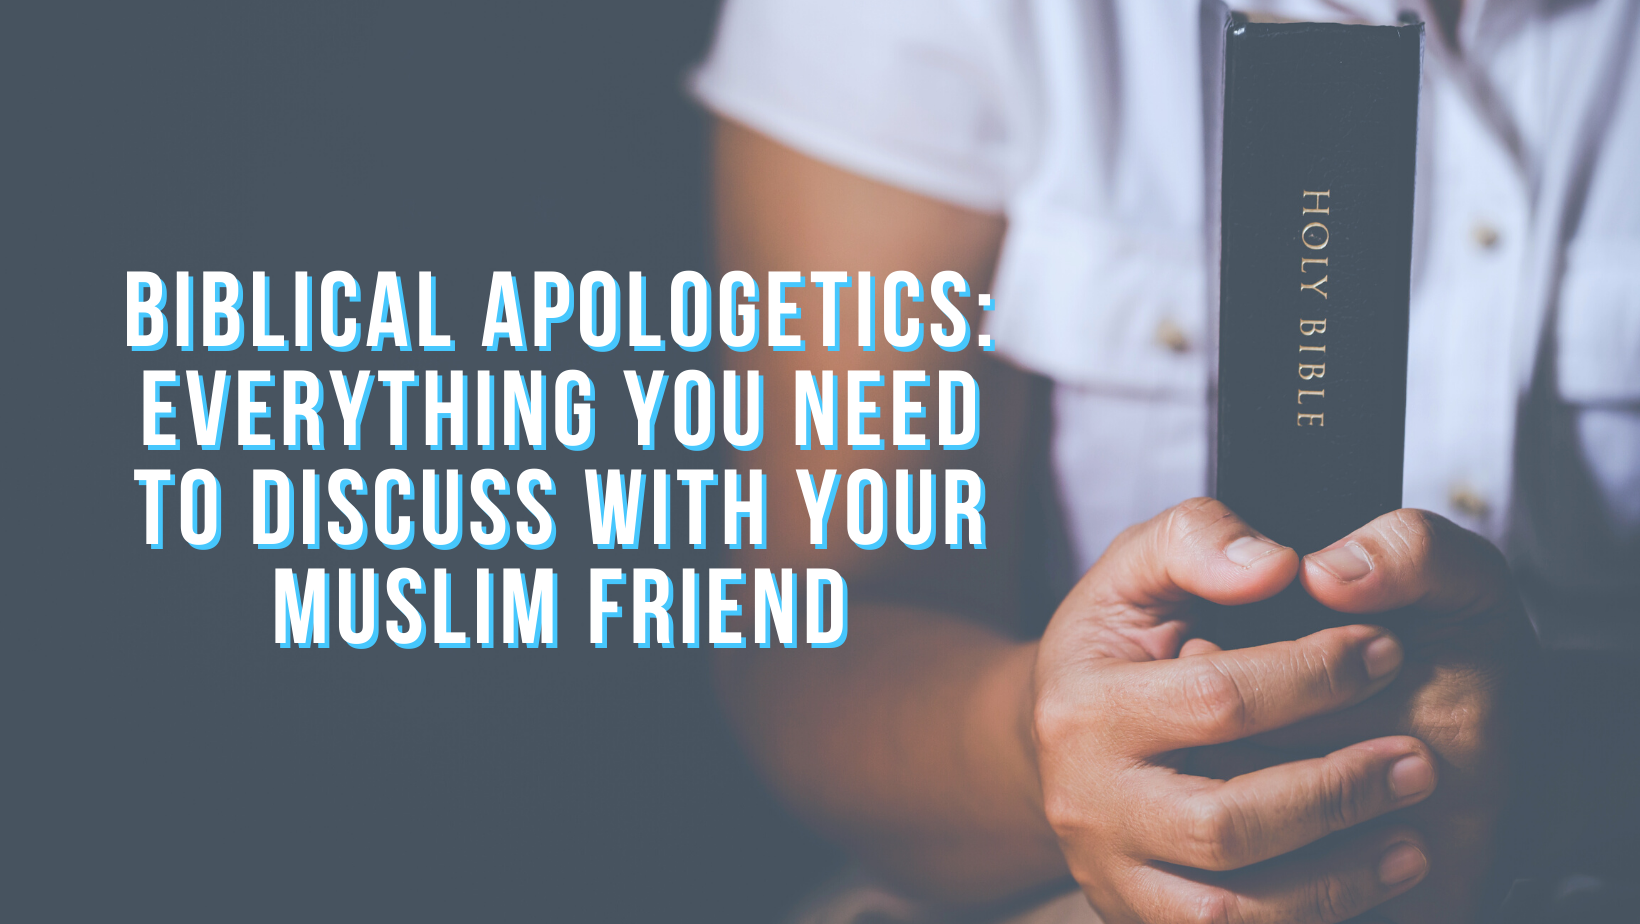 Biblical Apologetics: everything you need to discuss with your Muslim friend